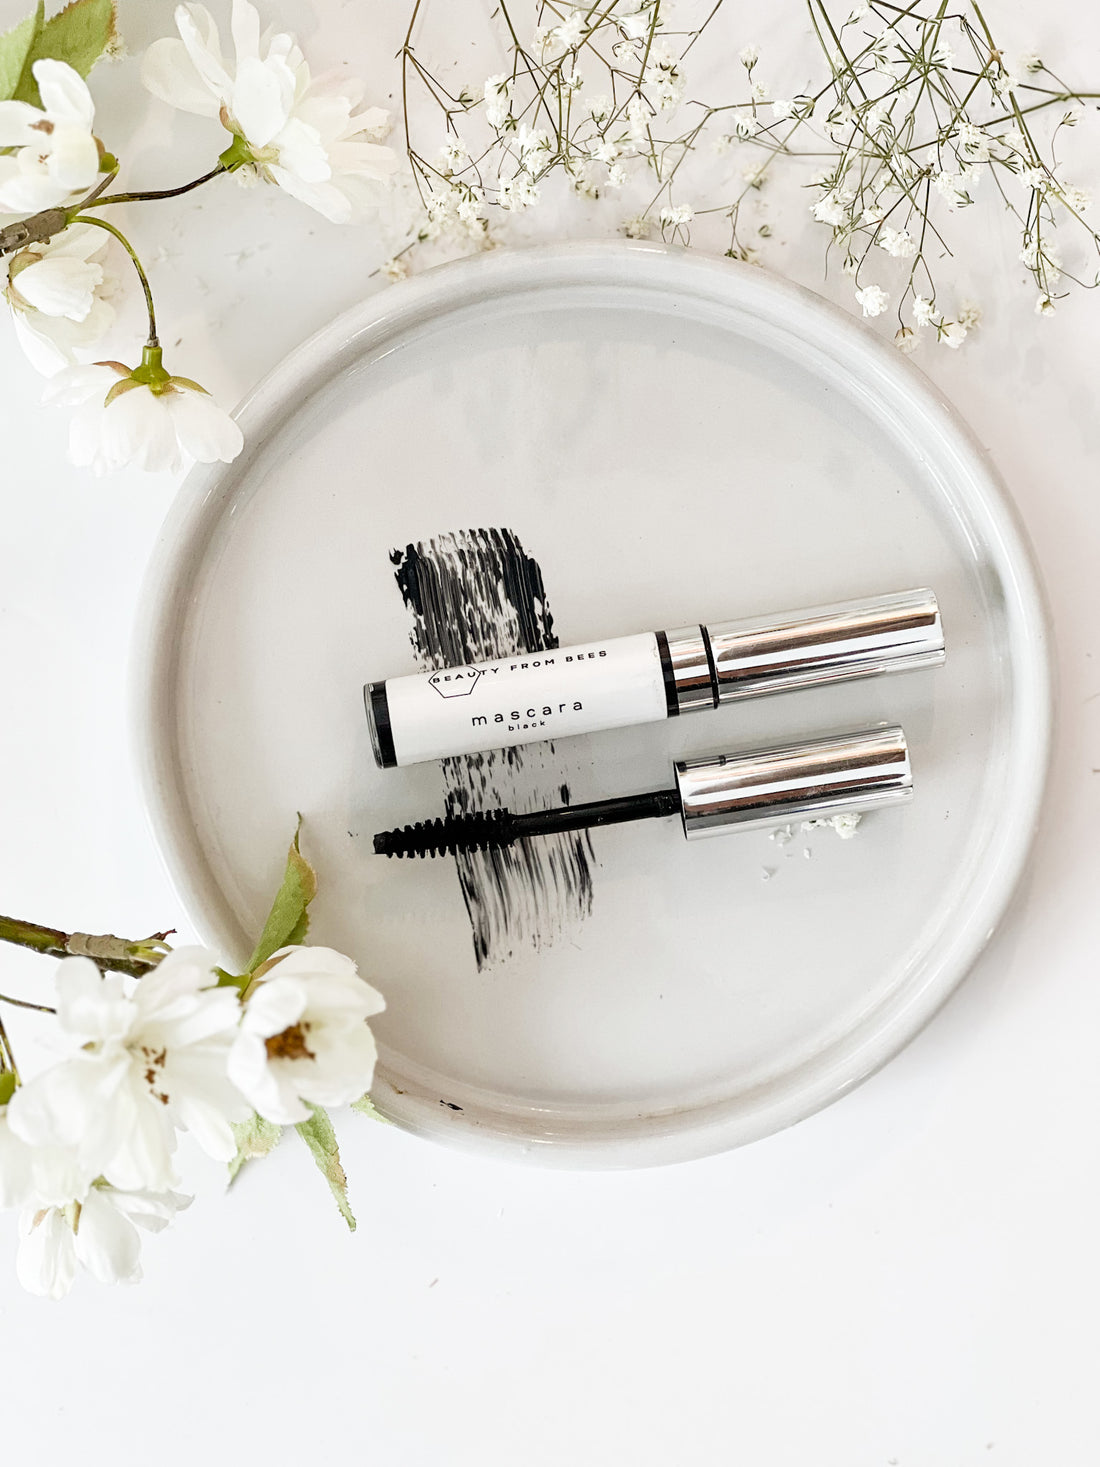 All-Natural Mascara is Here!